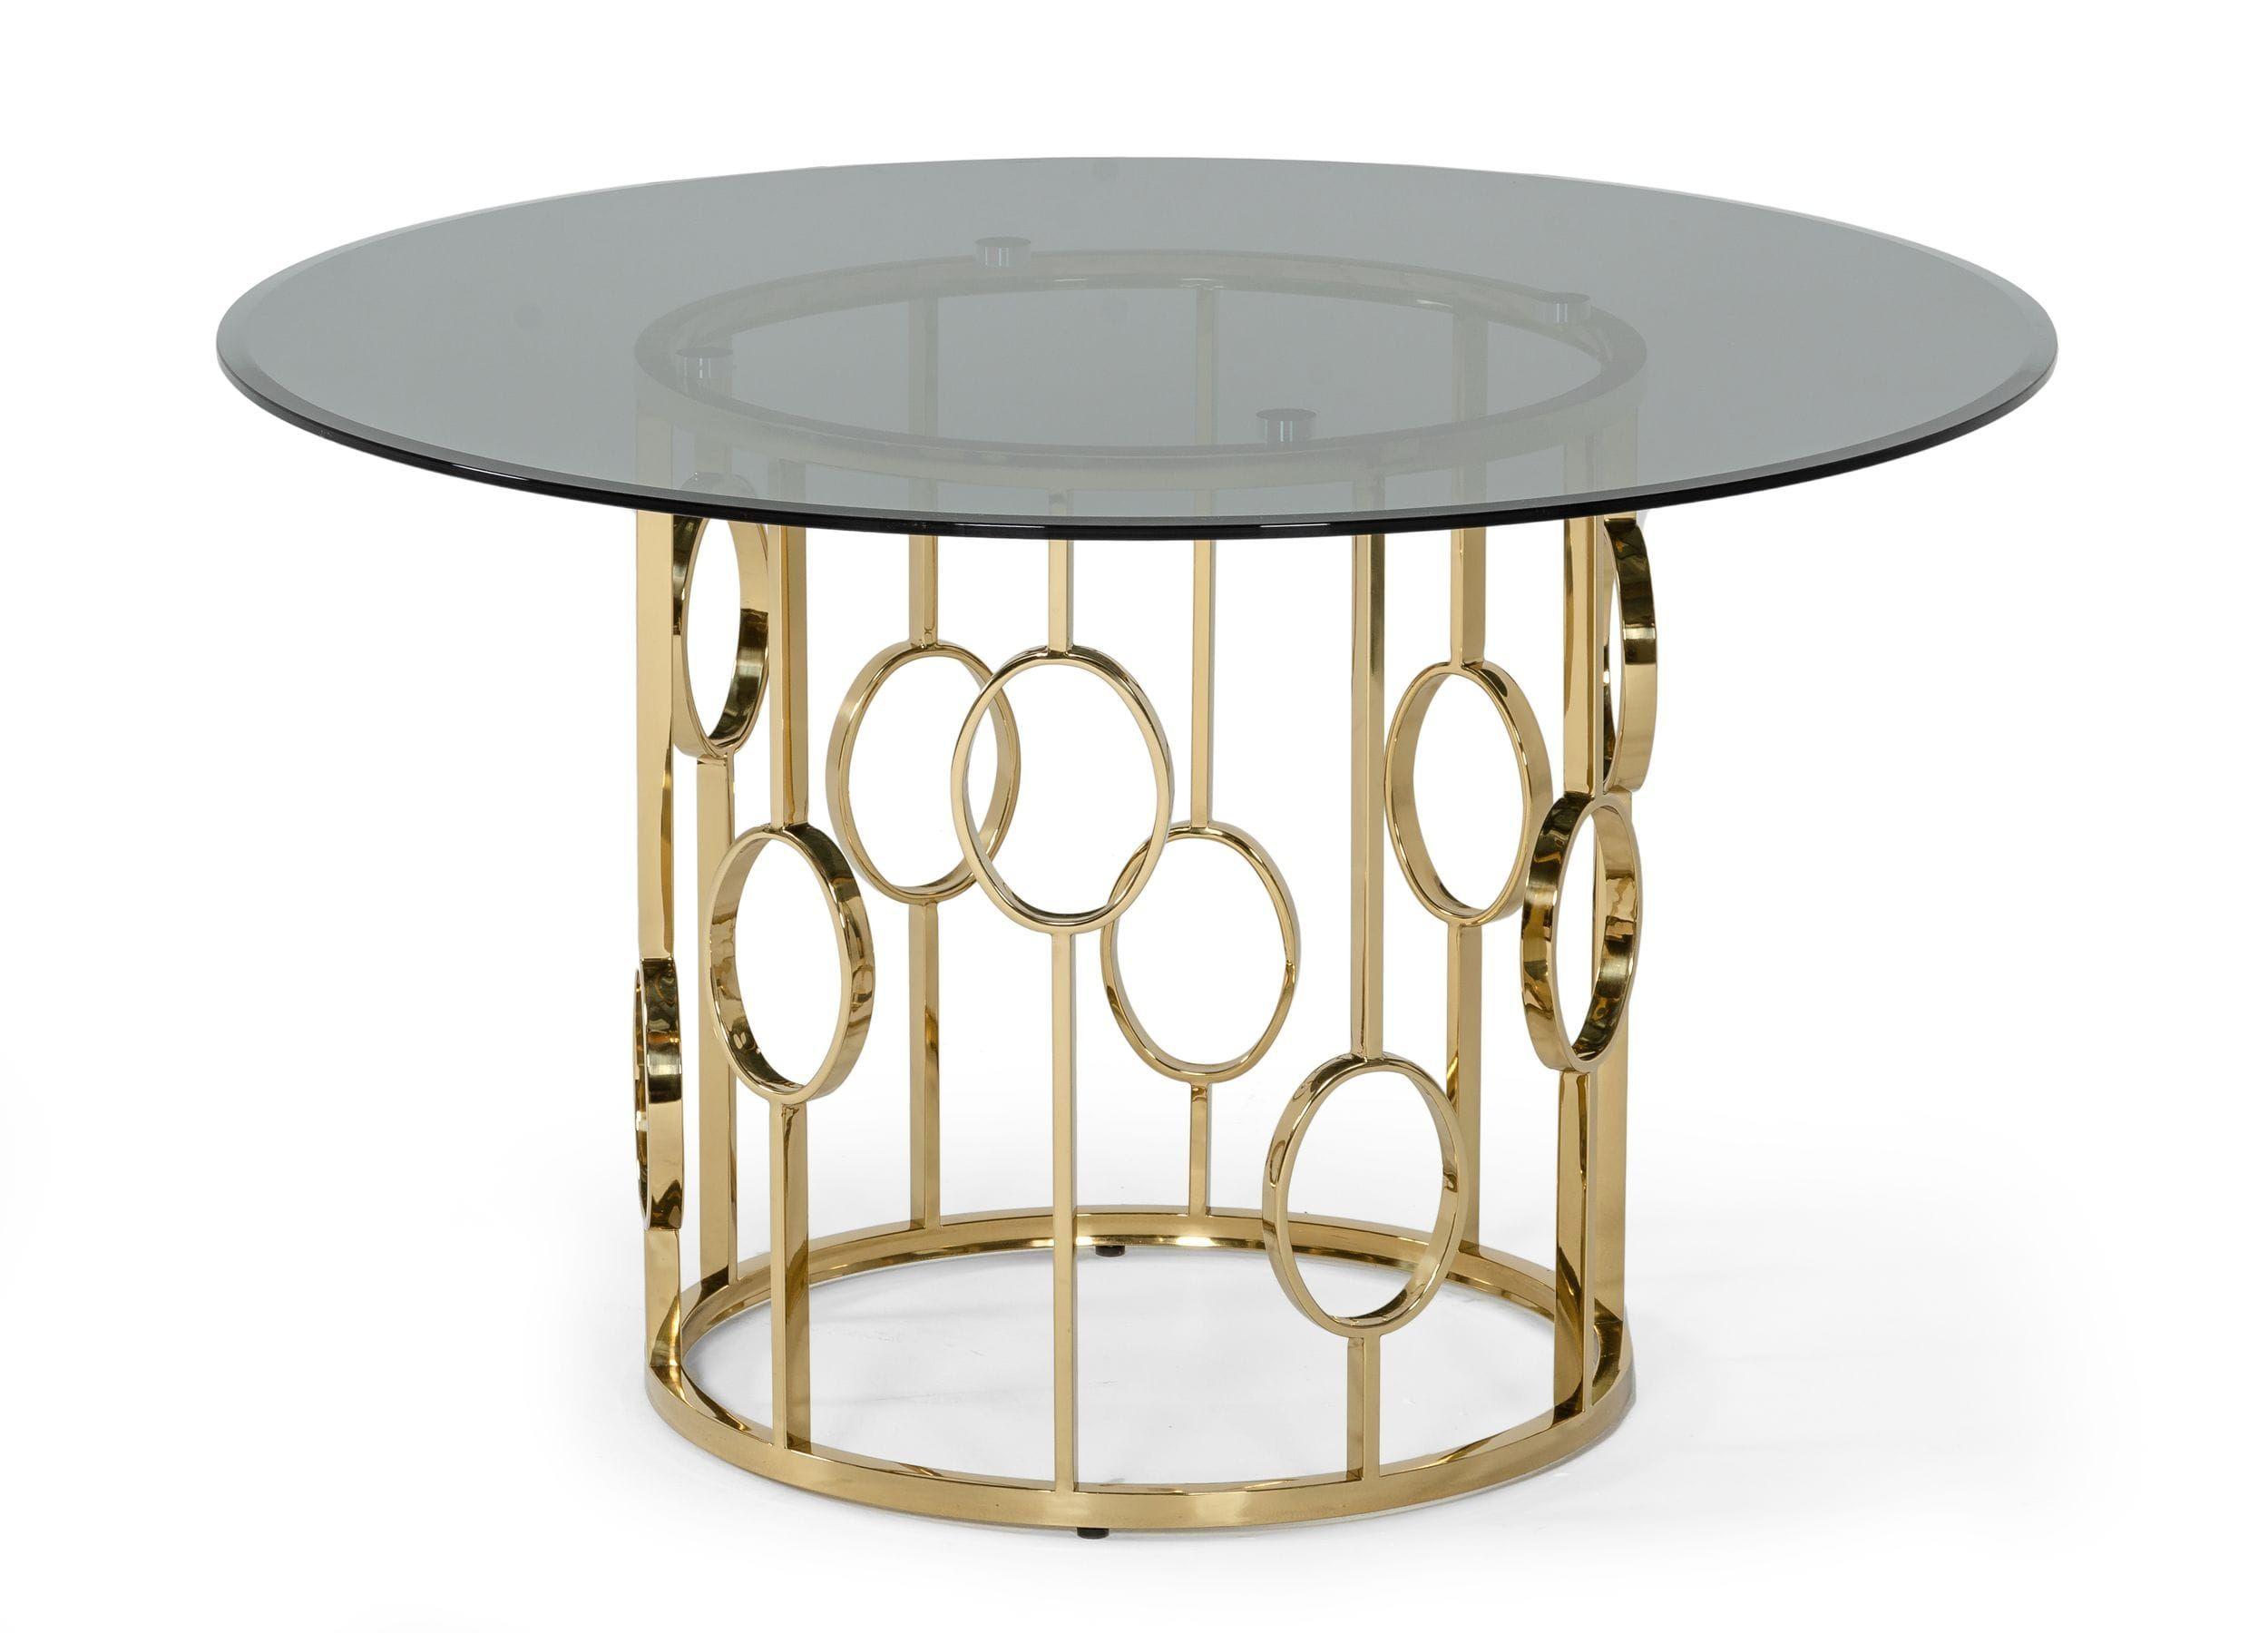 Contemporary, Modern Dining Table Filbert VGZAT122-GOLD-DT in Gold, Beige 